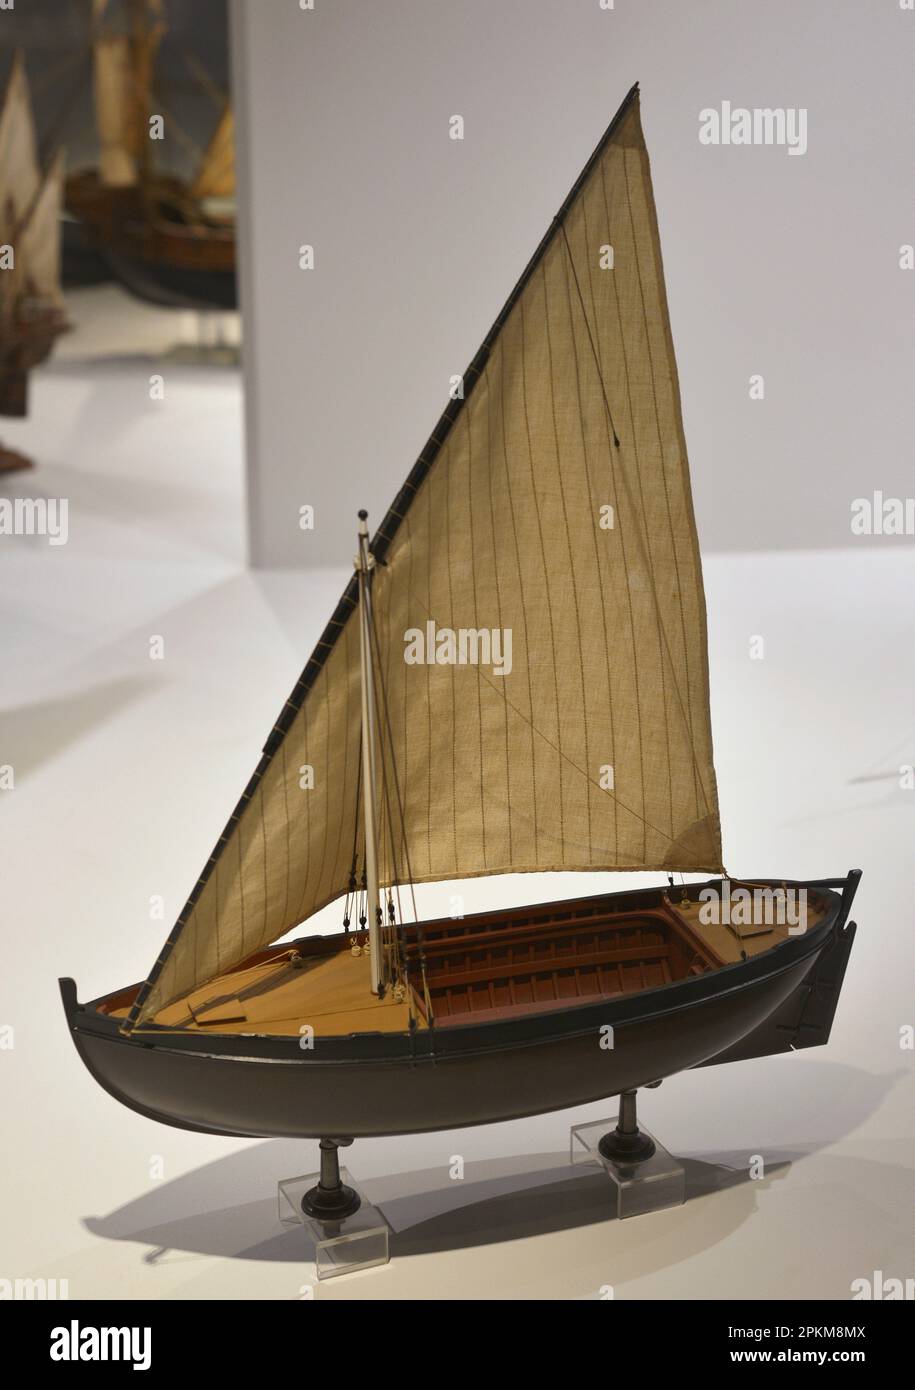 Fishing craft. Small fishing boat. It was used in the first voyages of exploration. In ancient chronicles it is referred to as a "fishing caravel". Model. Maritime Museum. Lisbon, Portugal. Stock Photo